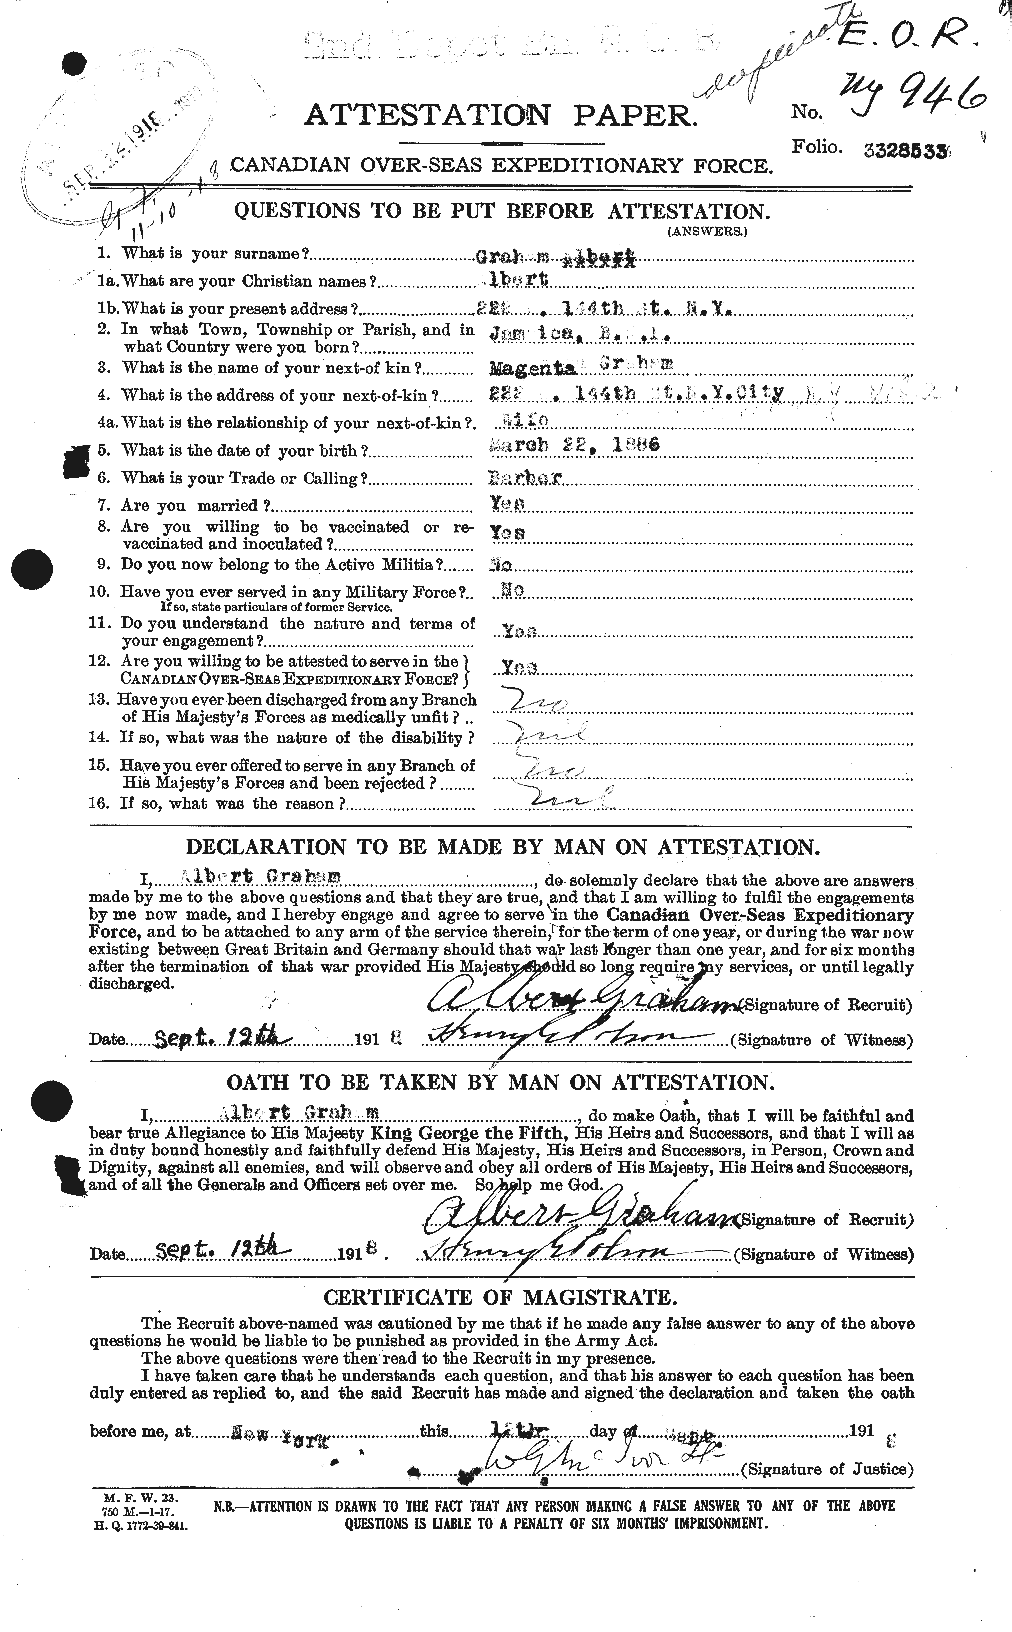 Personnel Records of the First World War - CEF 359565a